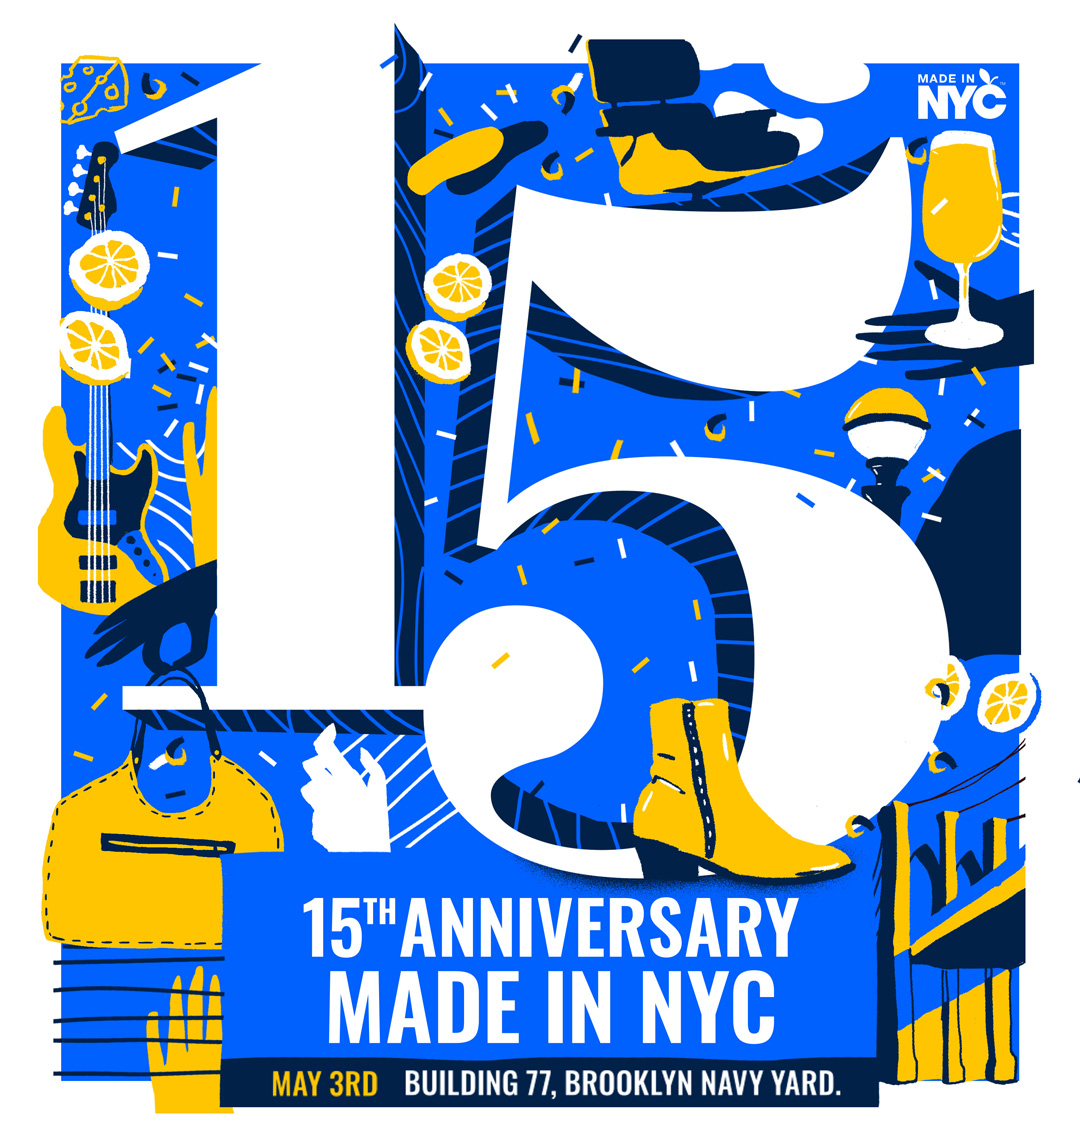 Made in NYC 15th Anniversary